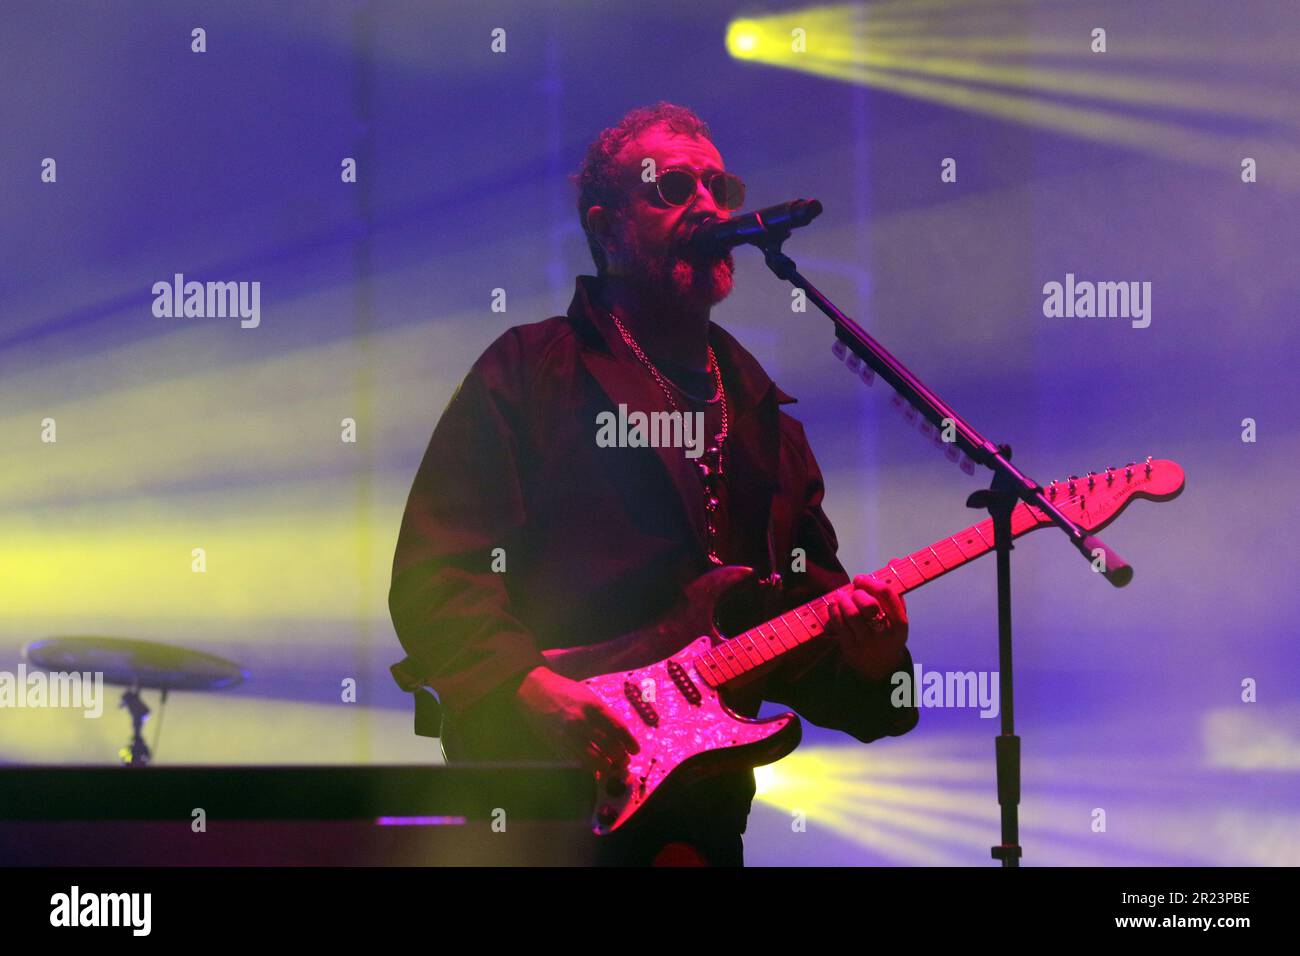 Mexico City, Mexico. 12th May, 2023. May 12, 2023, Mexico City, Mexico: Ismael 'Tito' Fuentes member of Mexican band Molotov performs on stage as part of their ‘EstallaMolotov' tour at Foro Sol. on May 12, 2023 in Mexico City, Mexico. (Photo by Ismael Rosas/ Eyepix Group) (Photo by Eyepix/NurPhoto) Credit: NurPhoto SRL/Alamy Live News Stock Photo